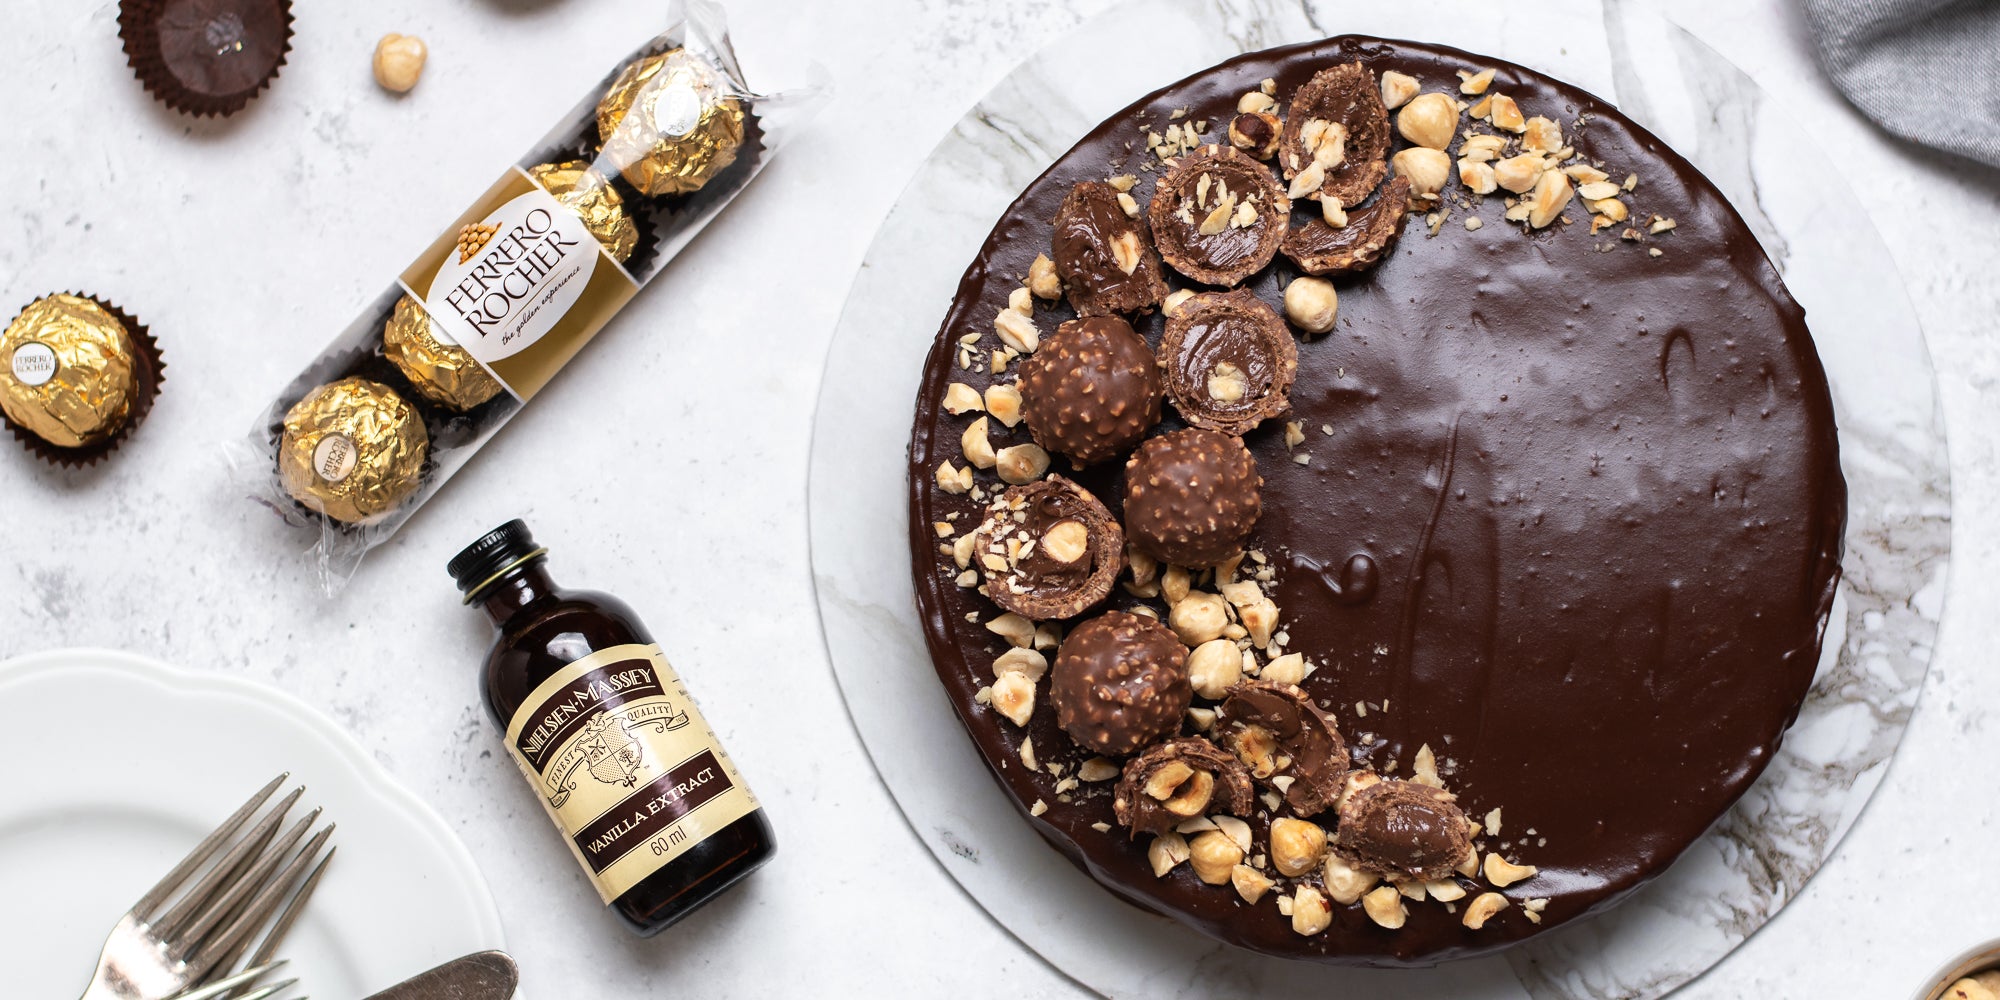 Top view of Gluten Free Chocolate Truffle Sachertorte sprinkled with hazelnuts, next to a packet of Ferrero Rocher's and a bottle of Nielsen-Massey Vanilla Extract